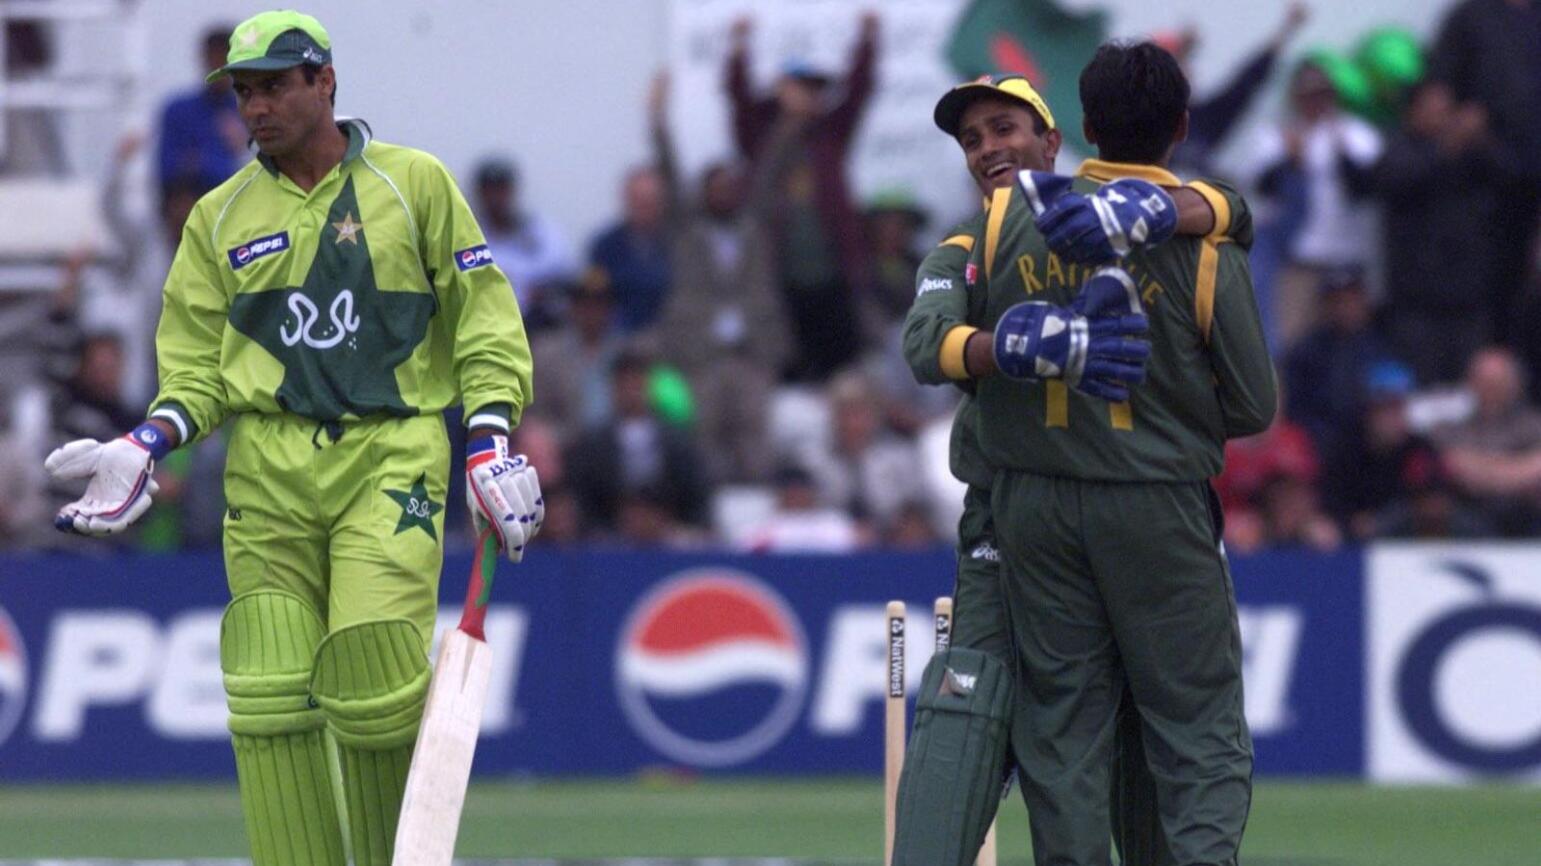 Waqar Younis of Pakistan is bowled out by Mohammed Rafique of Bangladesh, seen celebrating with his wicketkeeper Khaled Masud